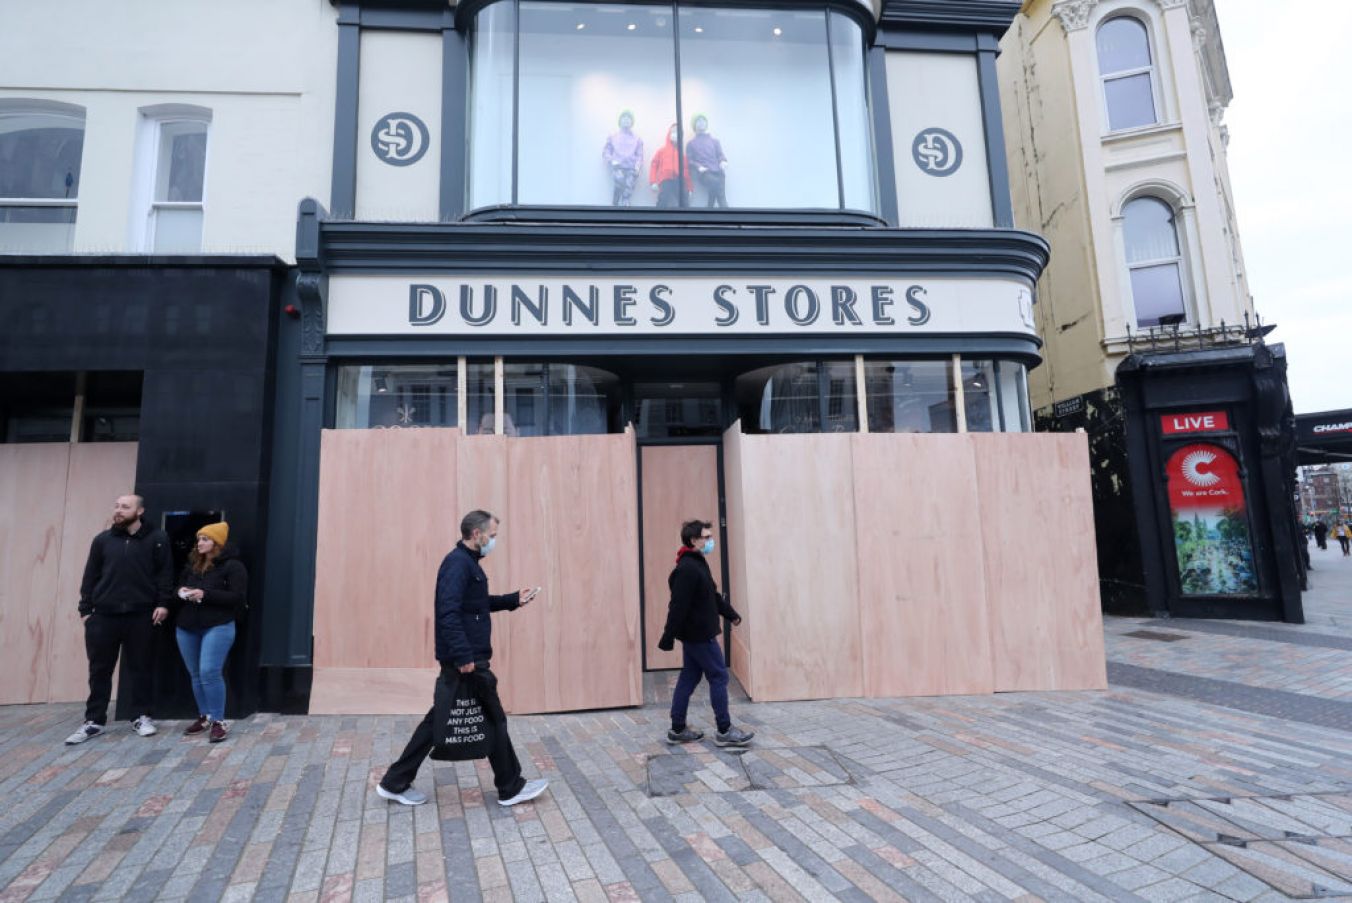 Dunnes Stores On Patrick Street In Cork Has Boarded Up Its Windows Ahead Of The Demonstration. Photo: Pa Images.